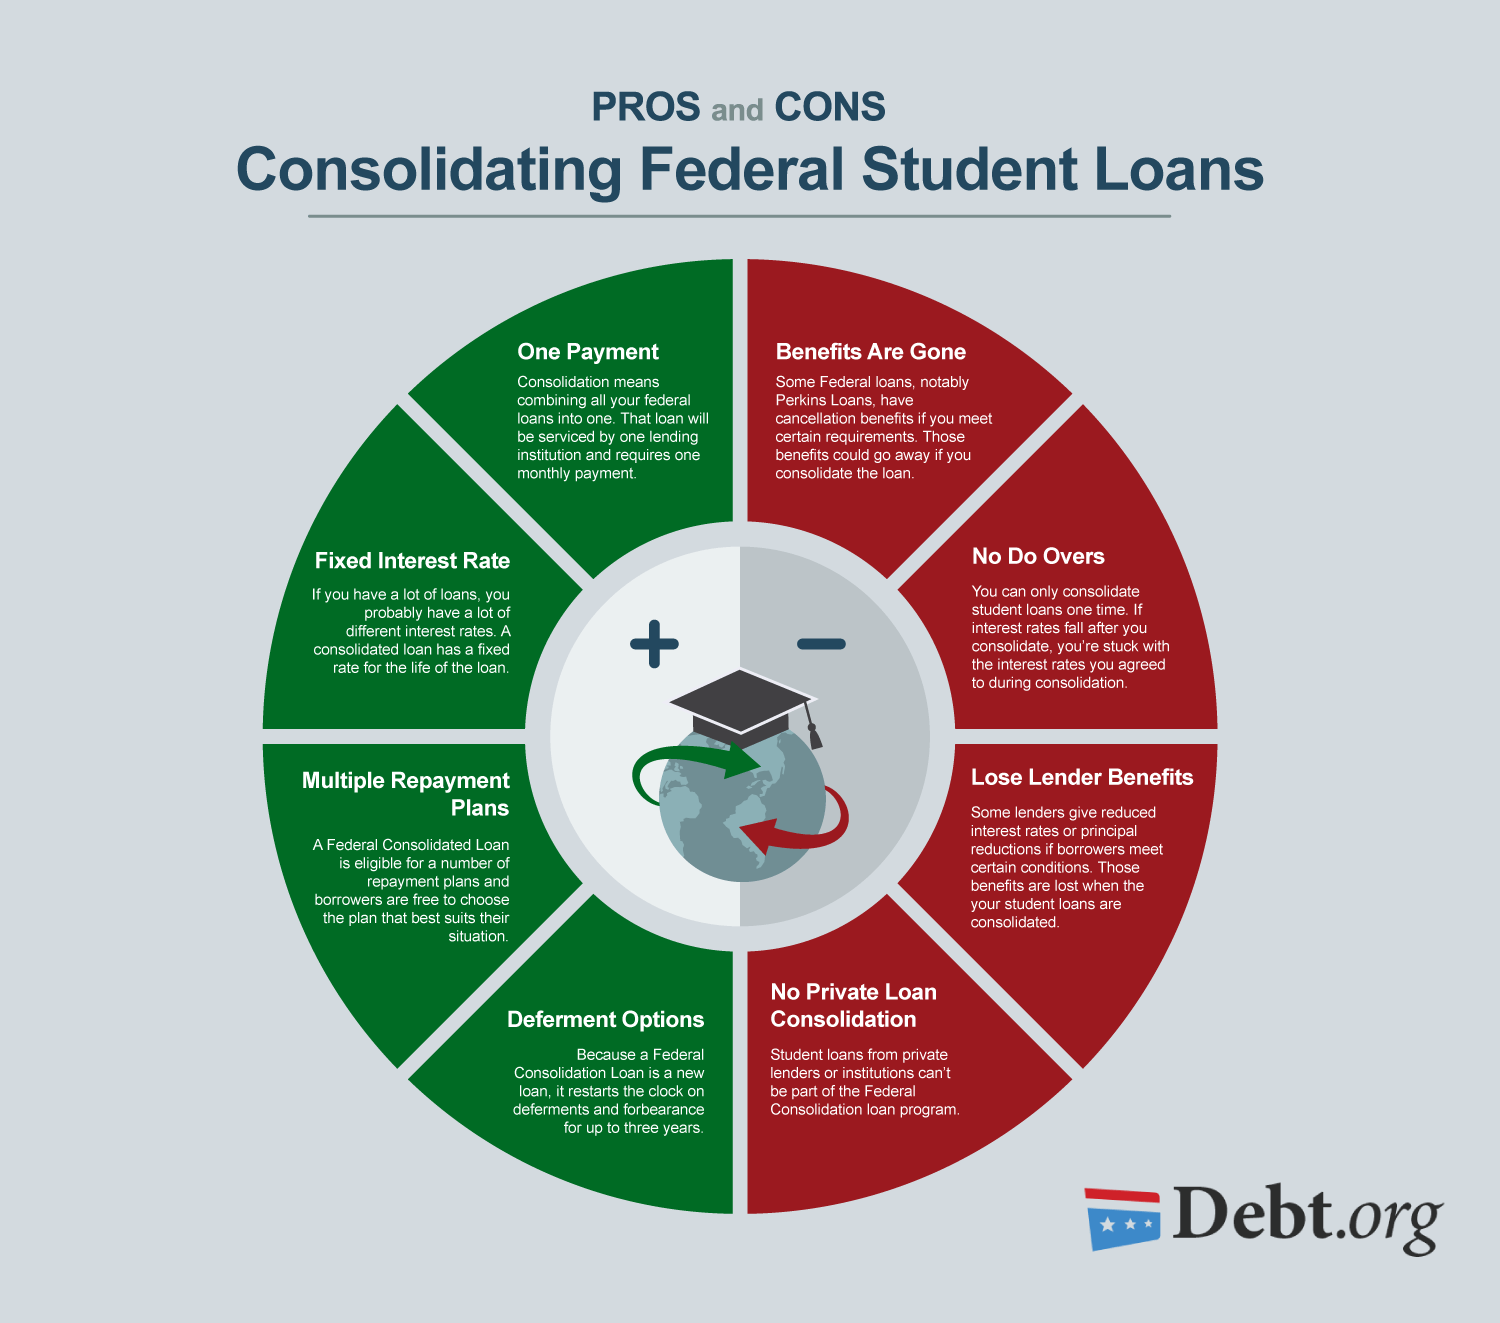 Who Offers Private Student Loan Consolidation